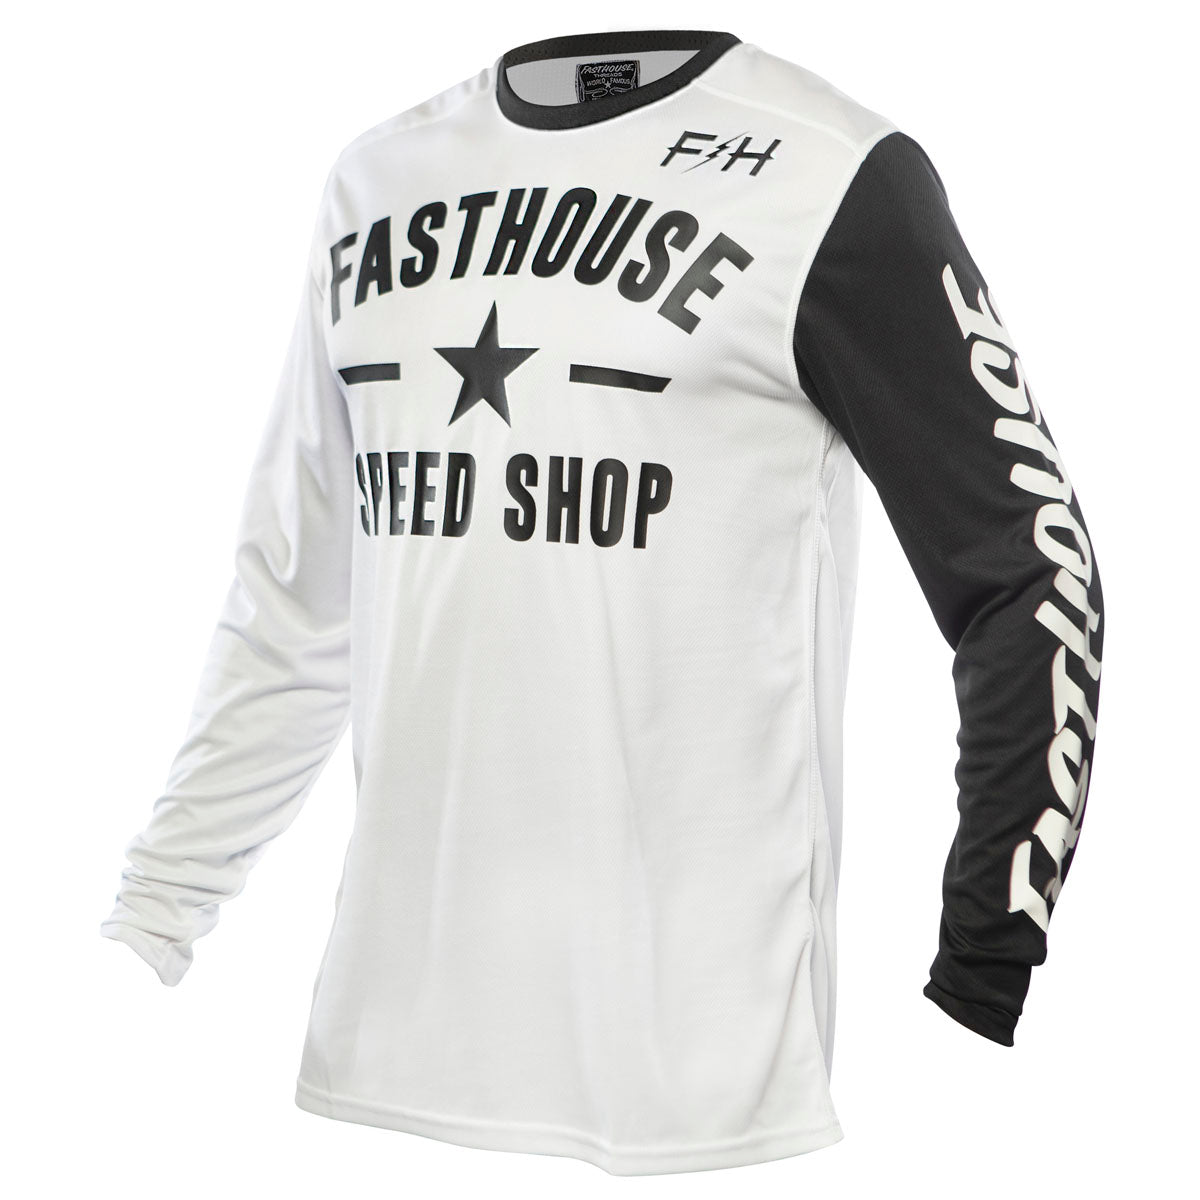 Fasthouse Carbon Jersey - White 